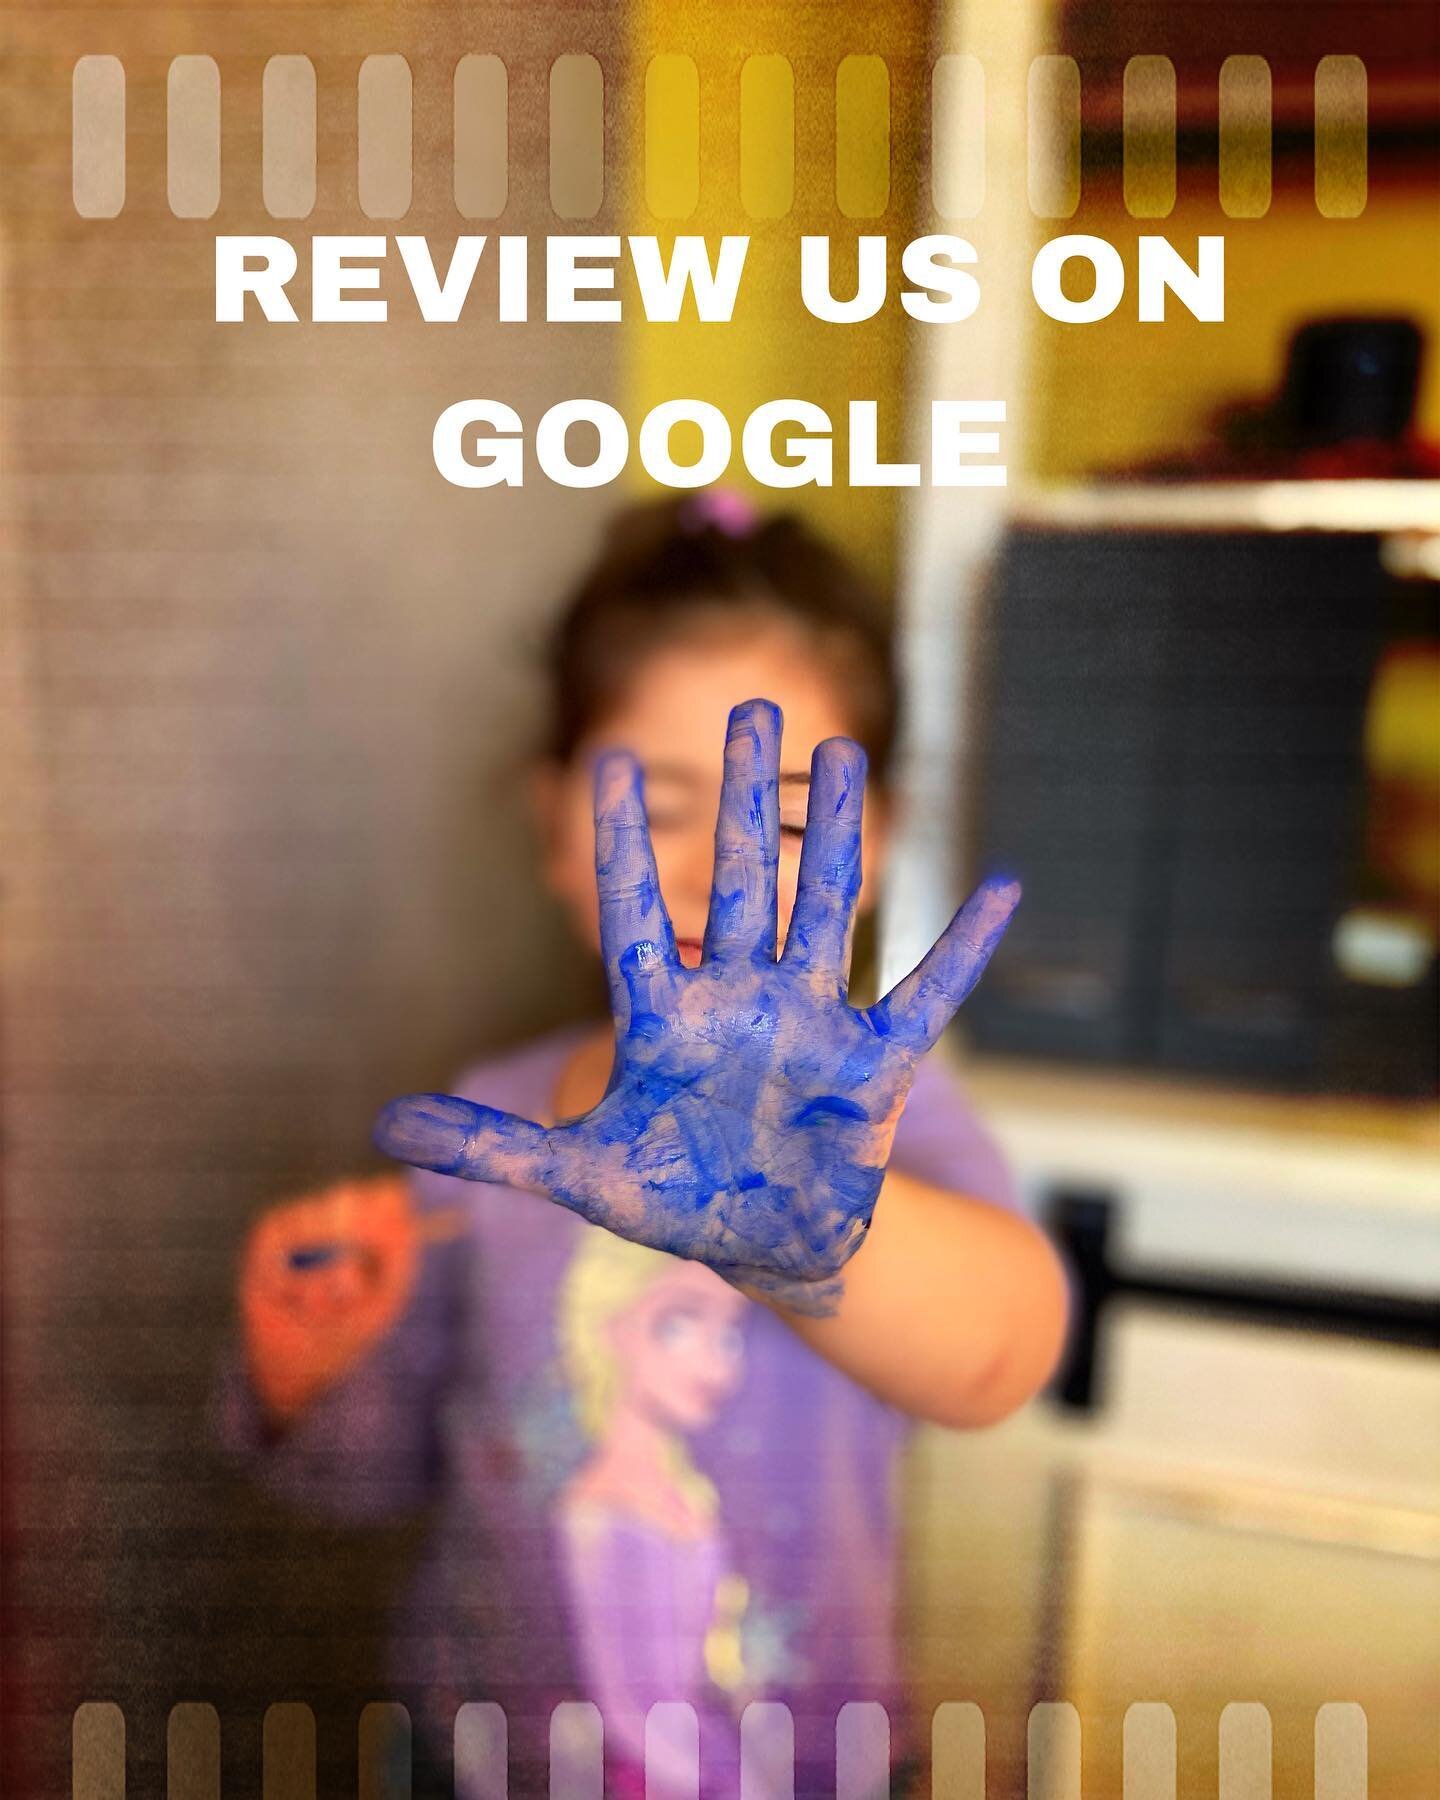 Almost there 🪜
.
We have -almost- 1️⃣0️⃣0️⃣ reviews on google and as a small business... we couldn&rsquo;t be any happier!!!
.
We know that life is busy but if you haven&rsquo;t yet, we would deeply appreciate you leaving a review on google❤️
.
.
.
